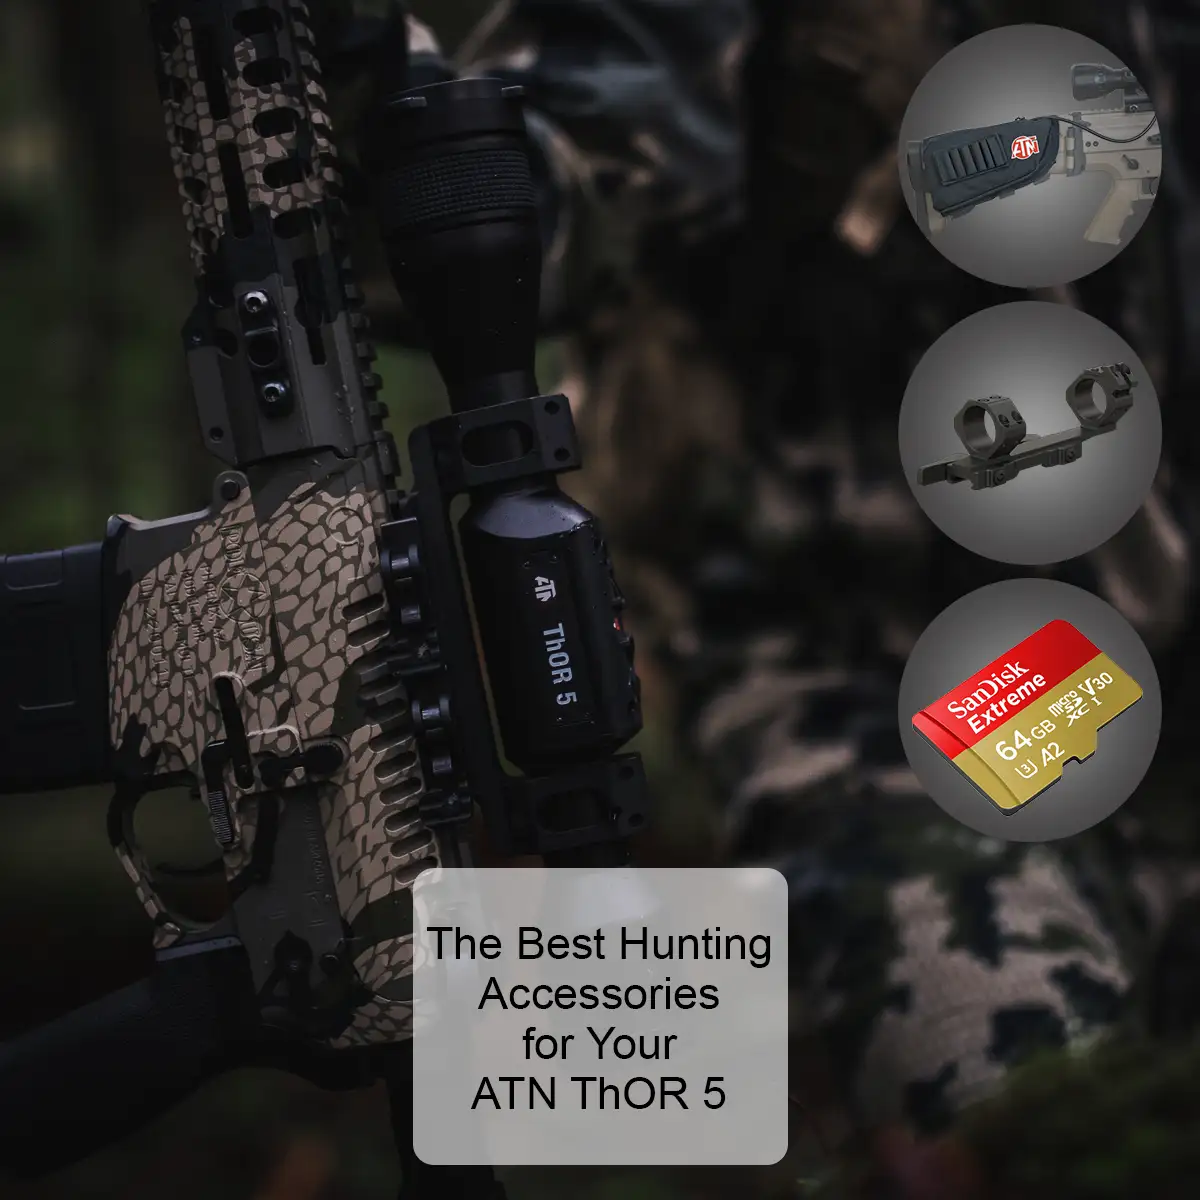 Best Hunting Accessories for Your ATN ThOR 5